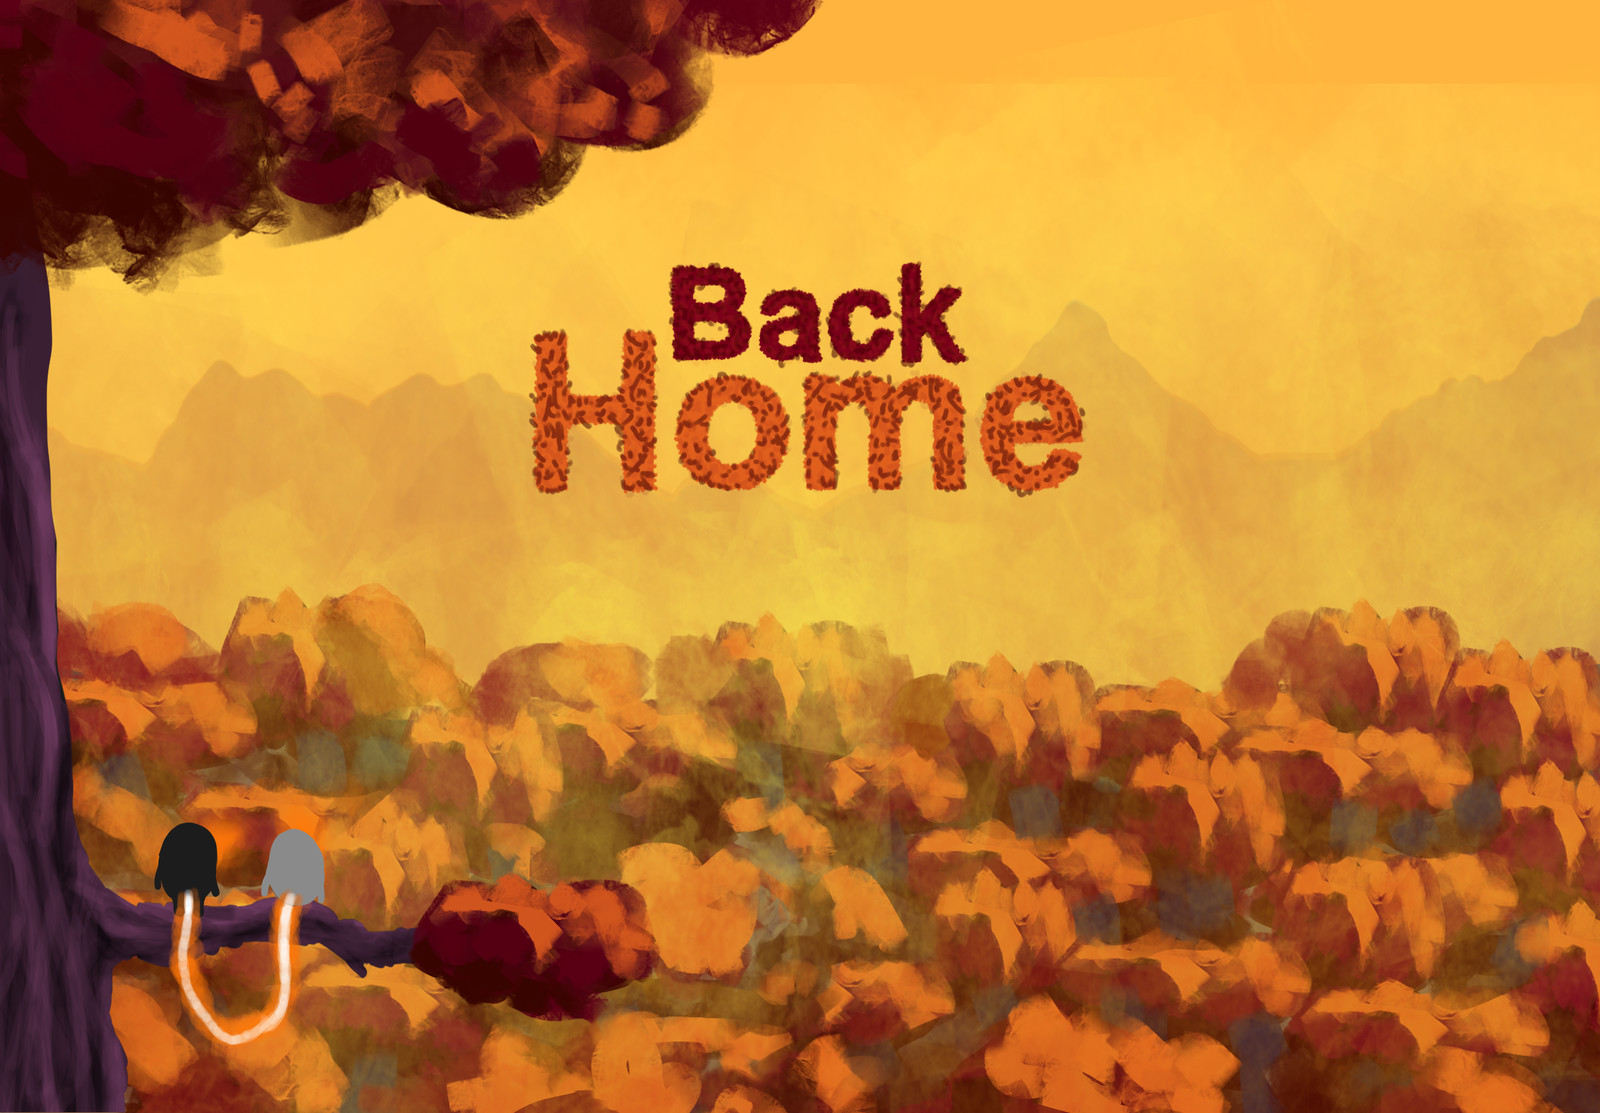 Student Game Project - Back Home